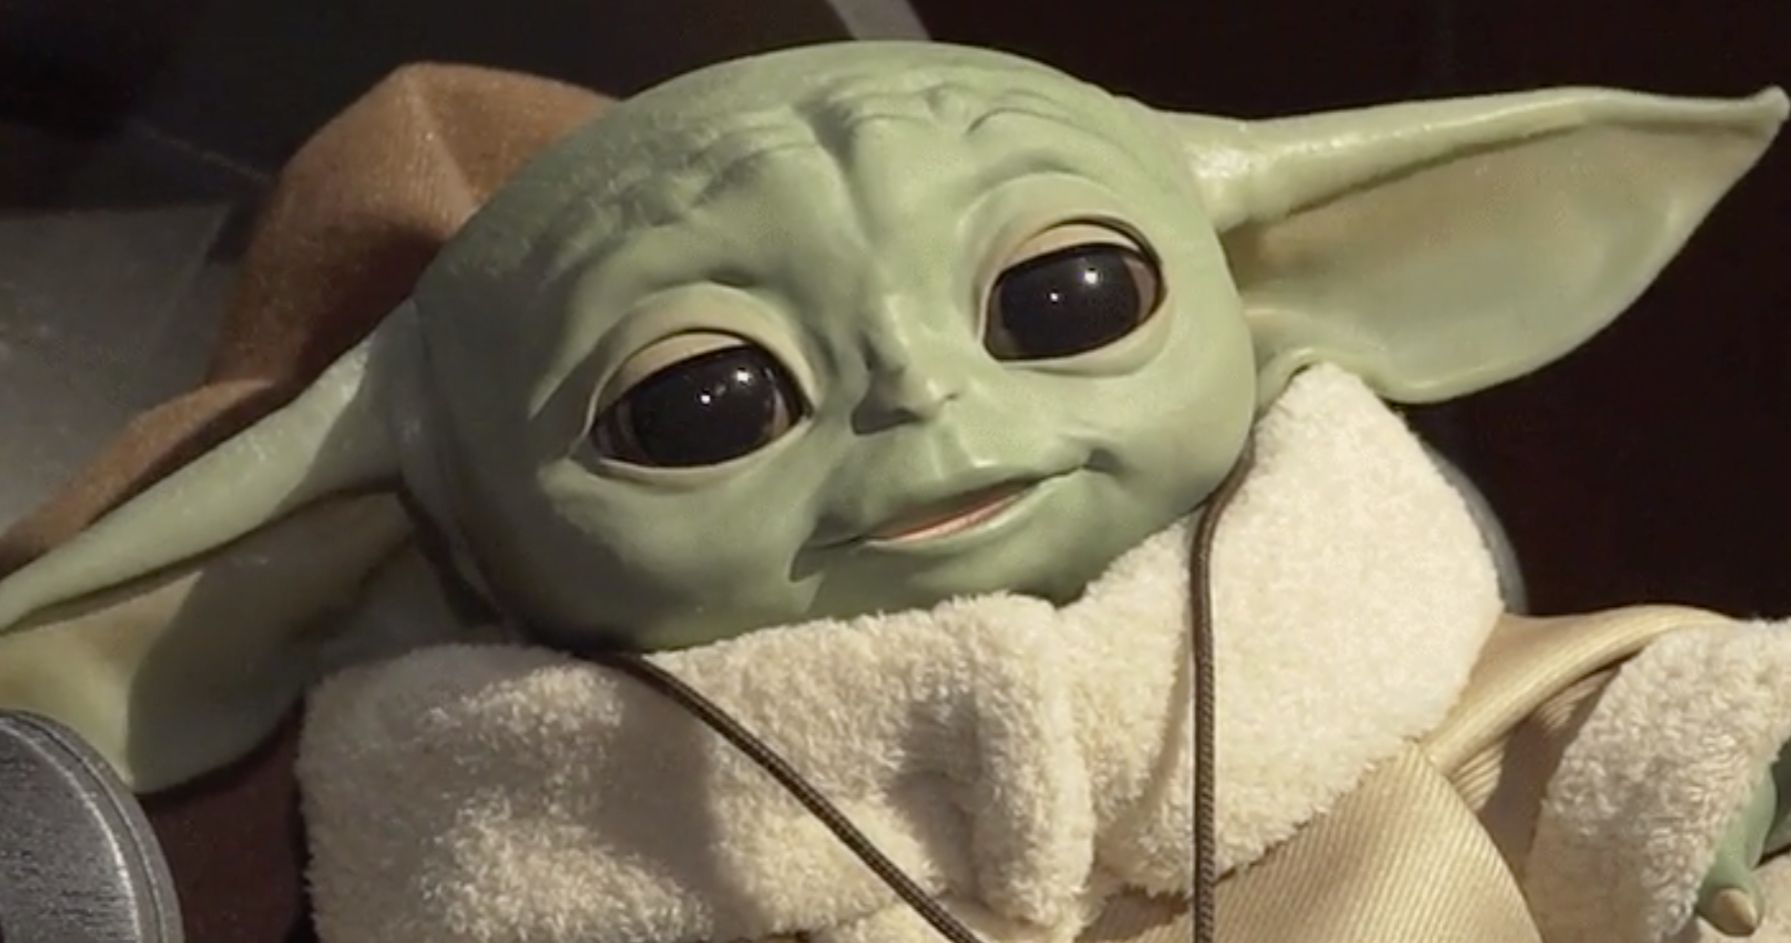 Baby Yoda Animatronic Plush Revealed in New Star Wars Toys Announcement